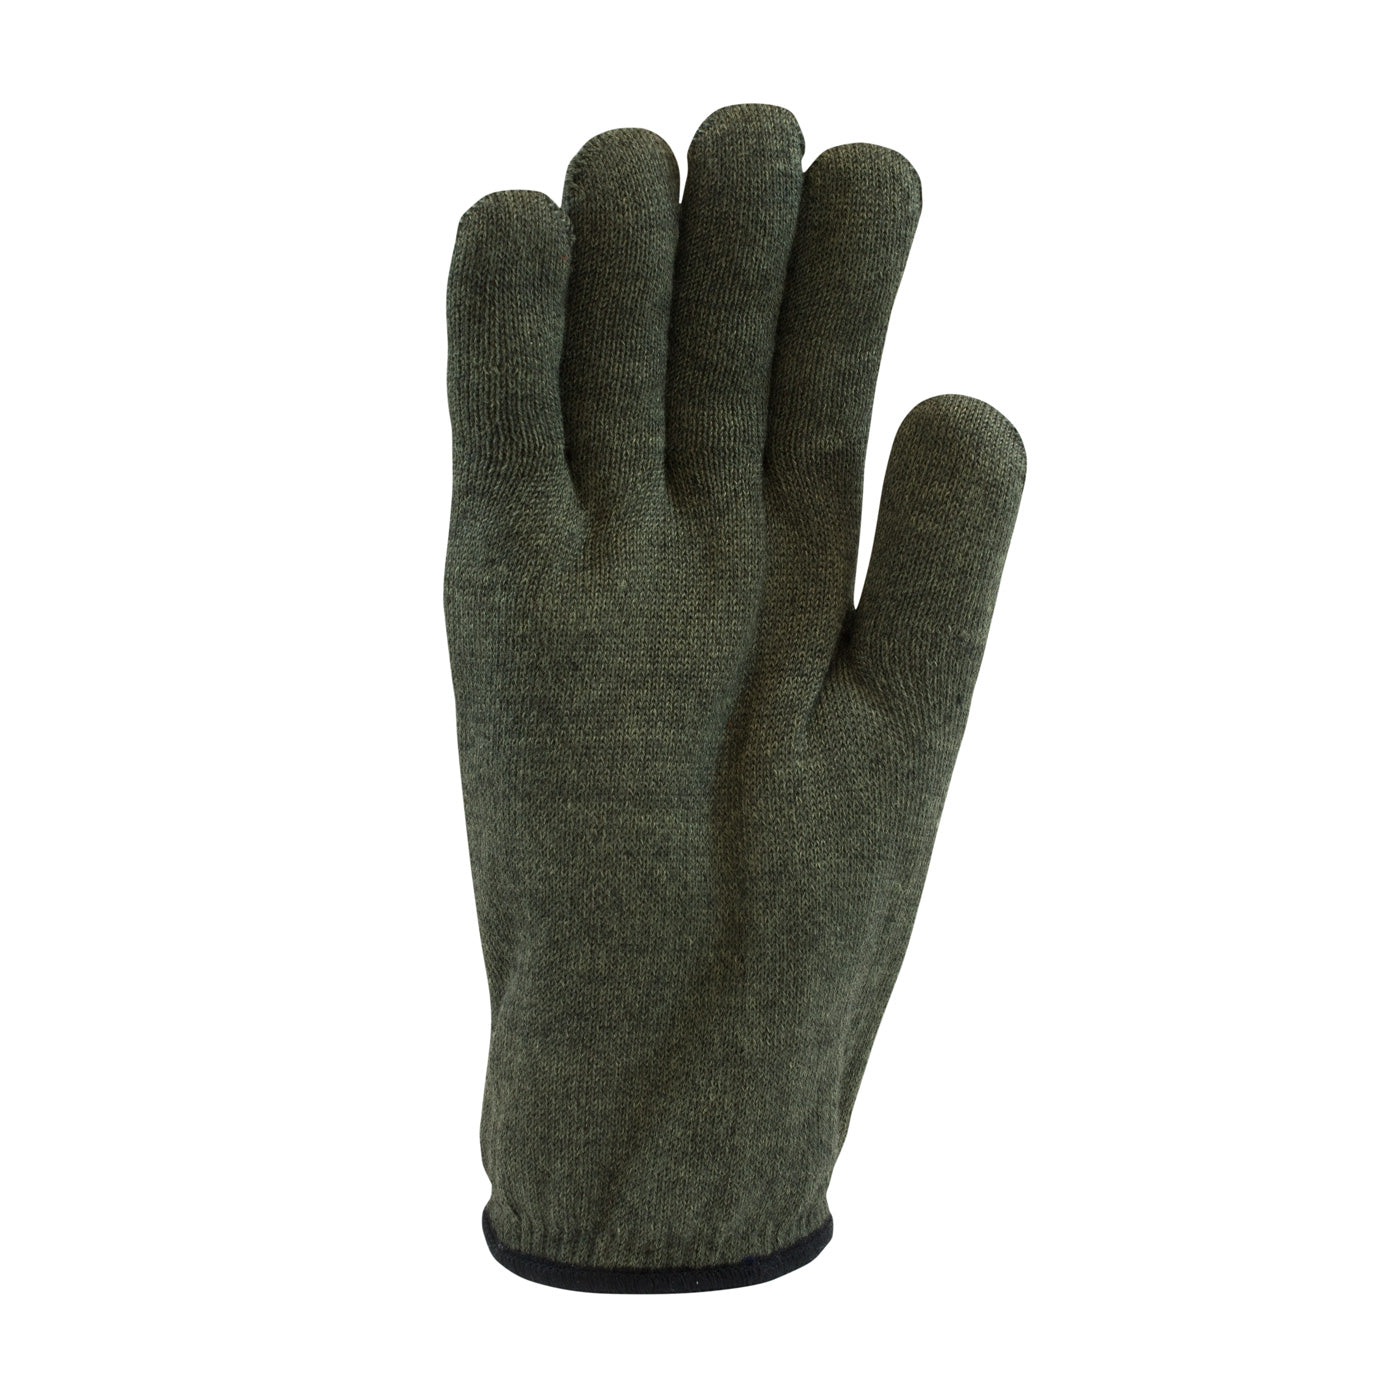 Kut Gard 43-850L DuPont Kevlar / Preox Seamless Knit Hot Mill Glove with Cotton Liner - 32 oz